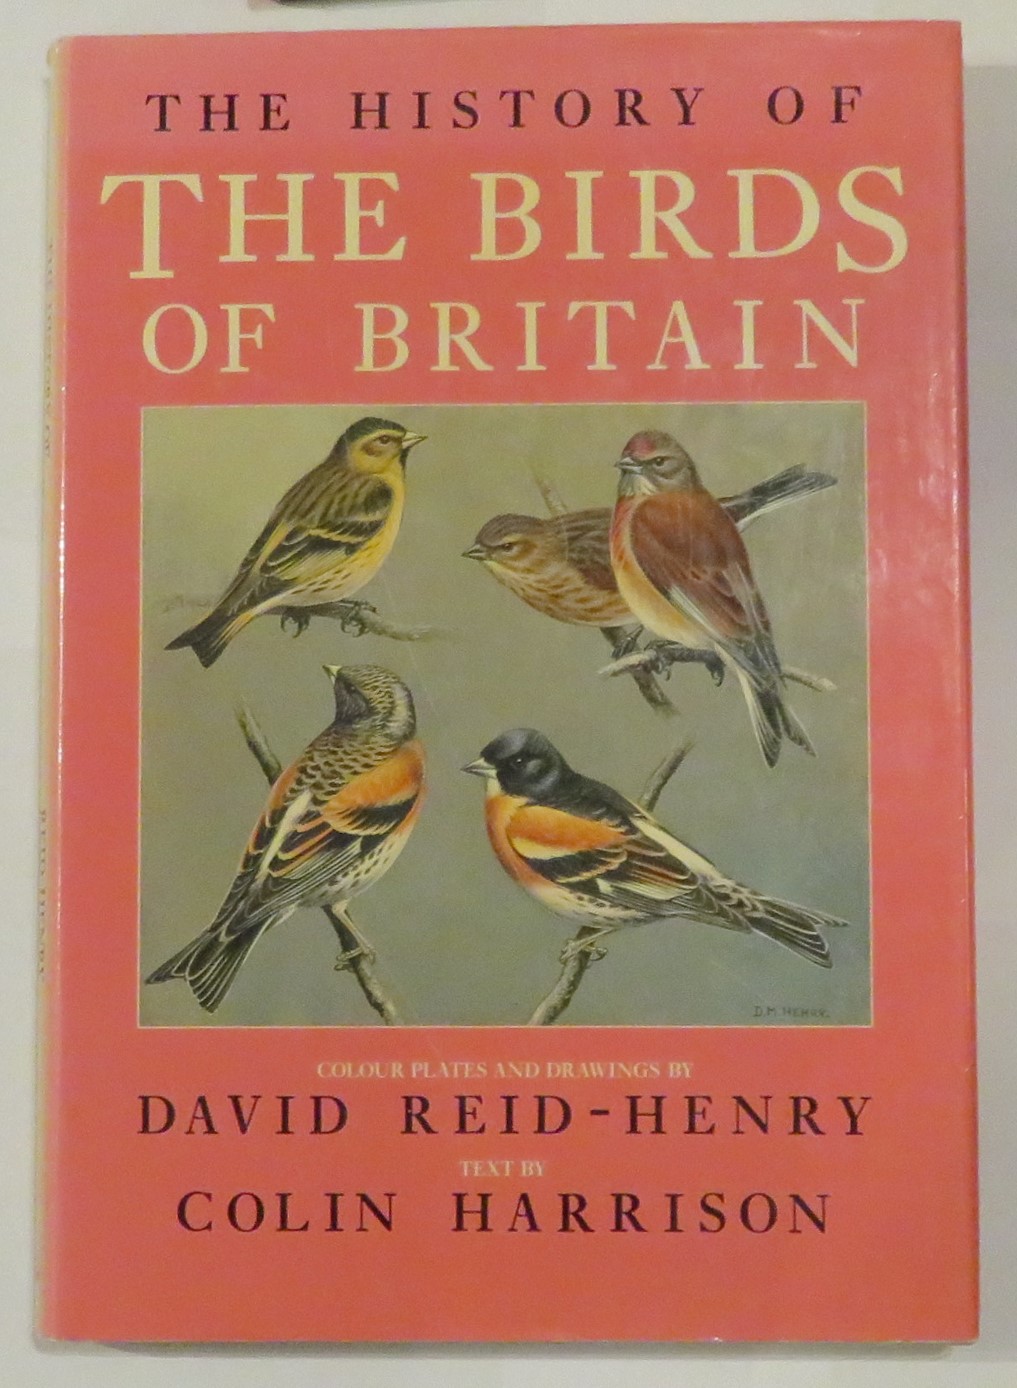 The History of The Birds of Britain